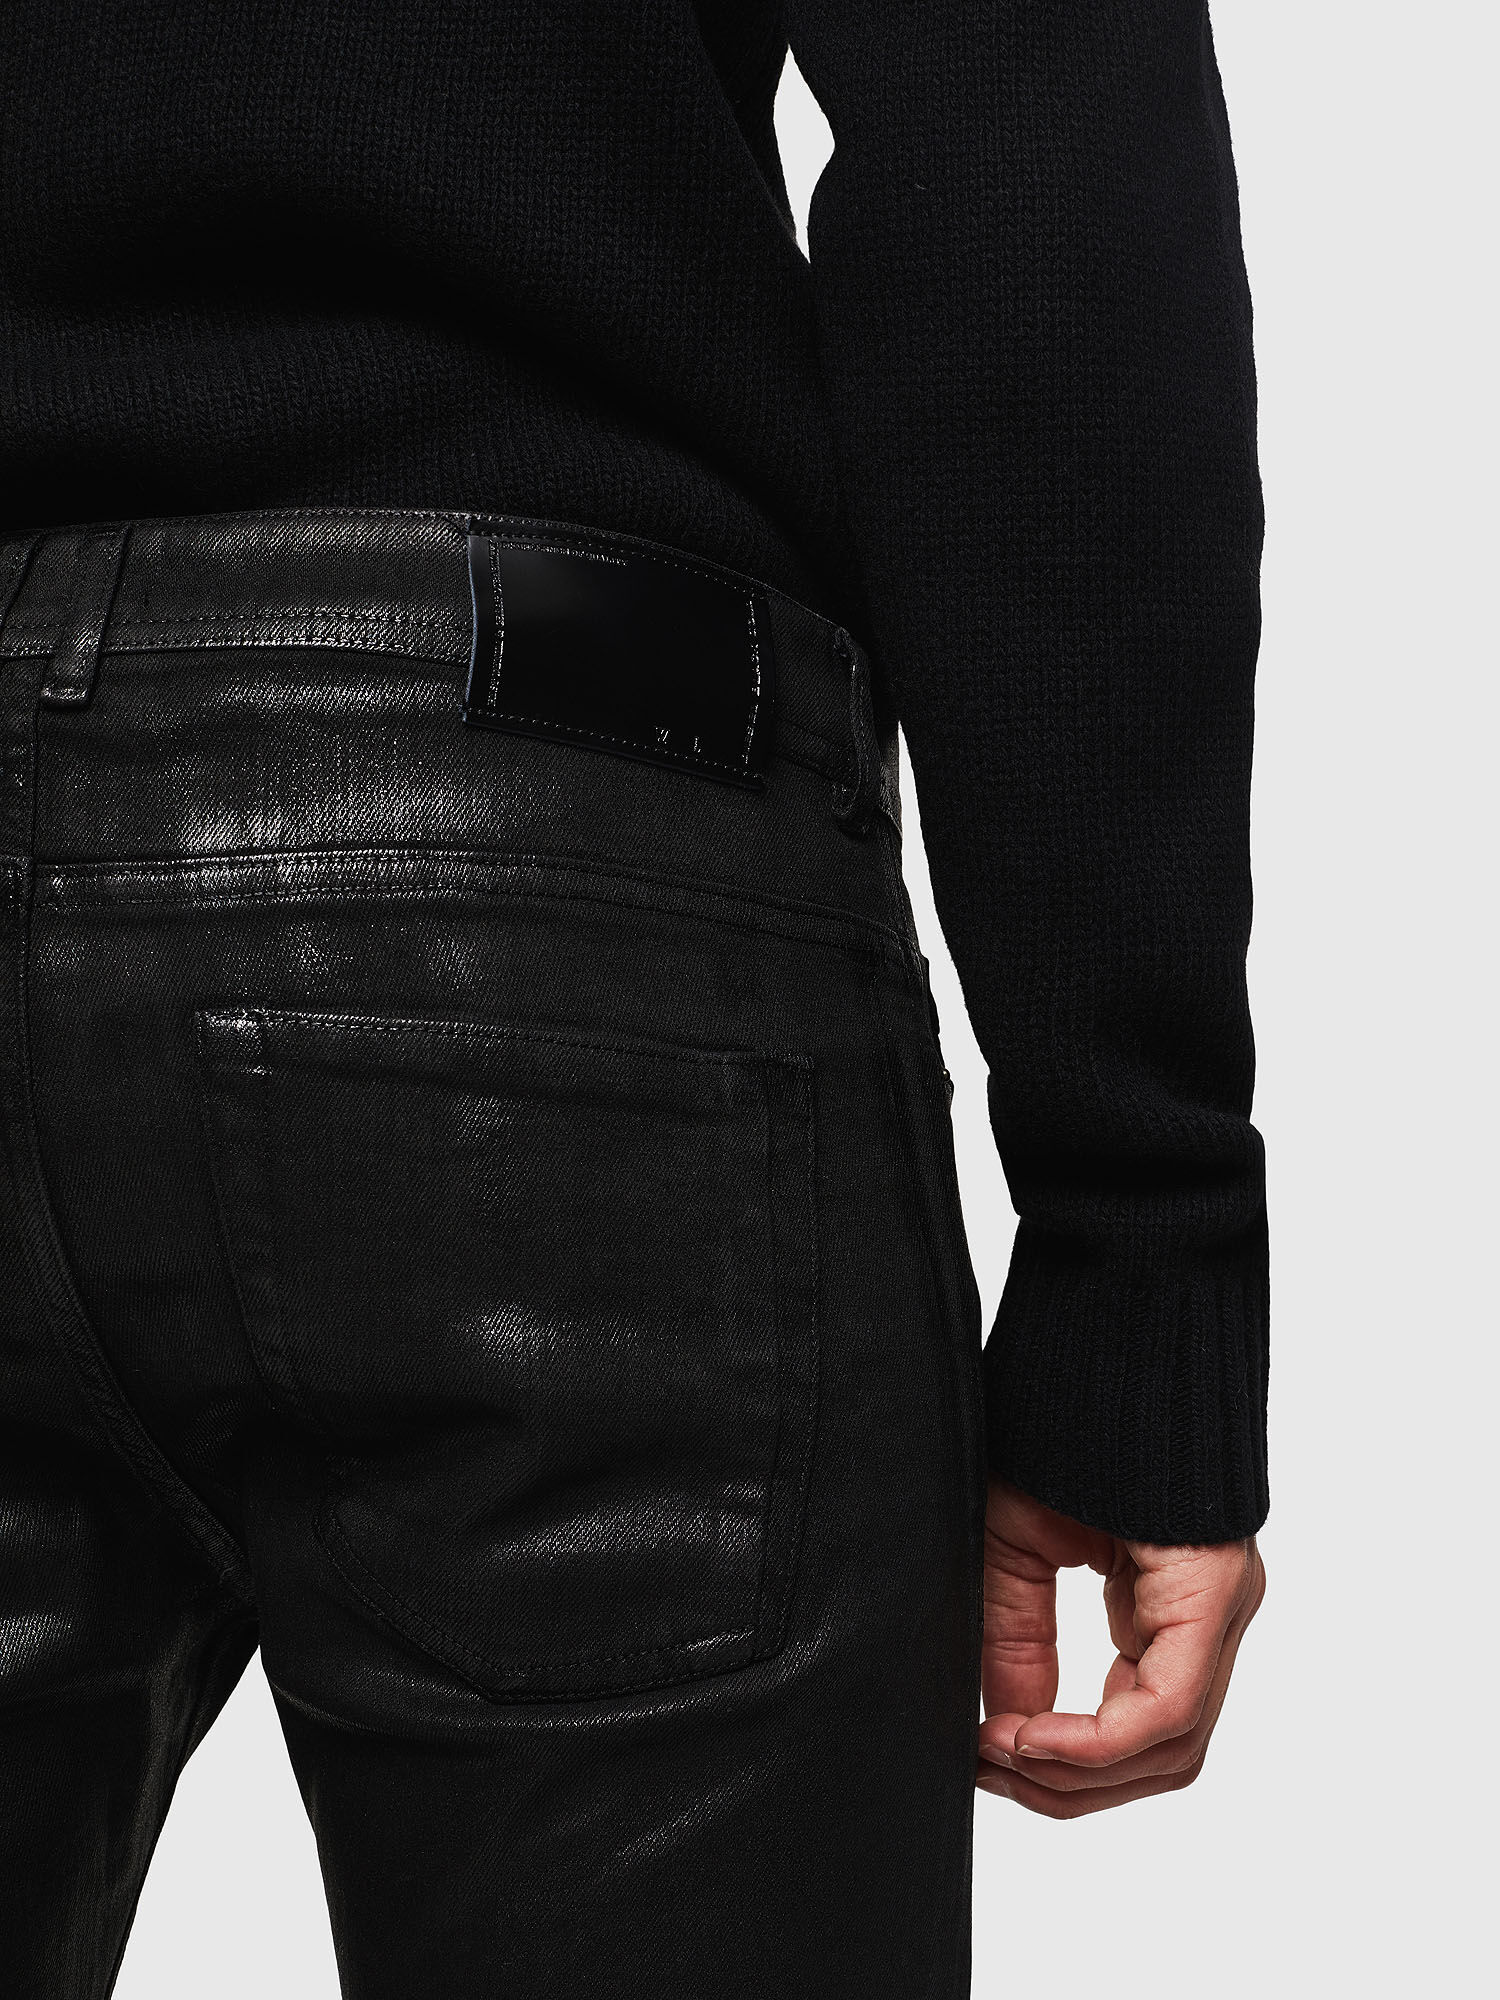 TYPE-2814 Men: Coated jeans with shiny finish | Diesel Black Gold